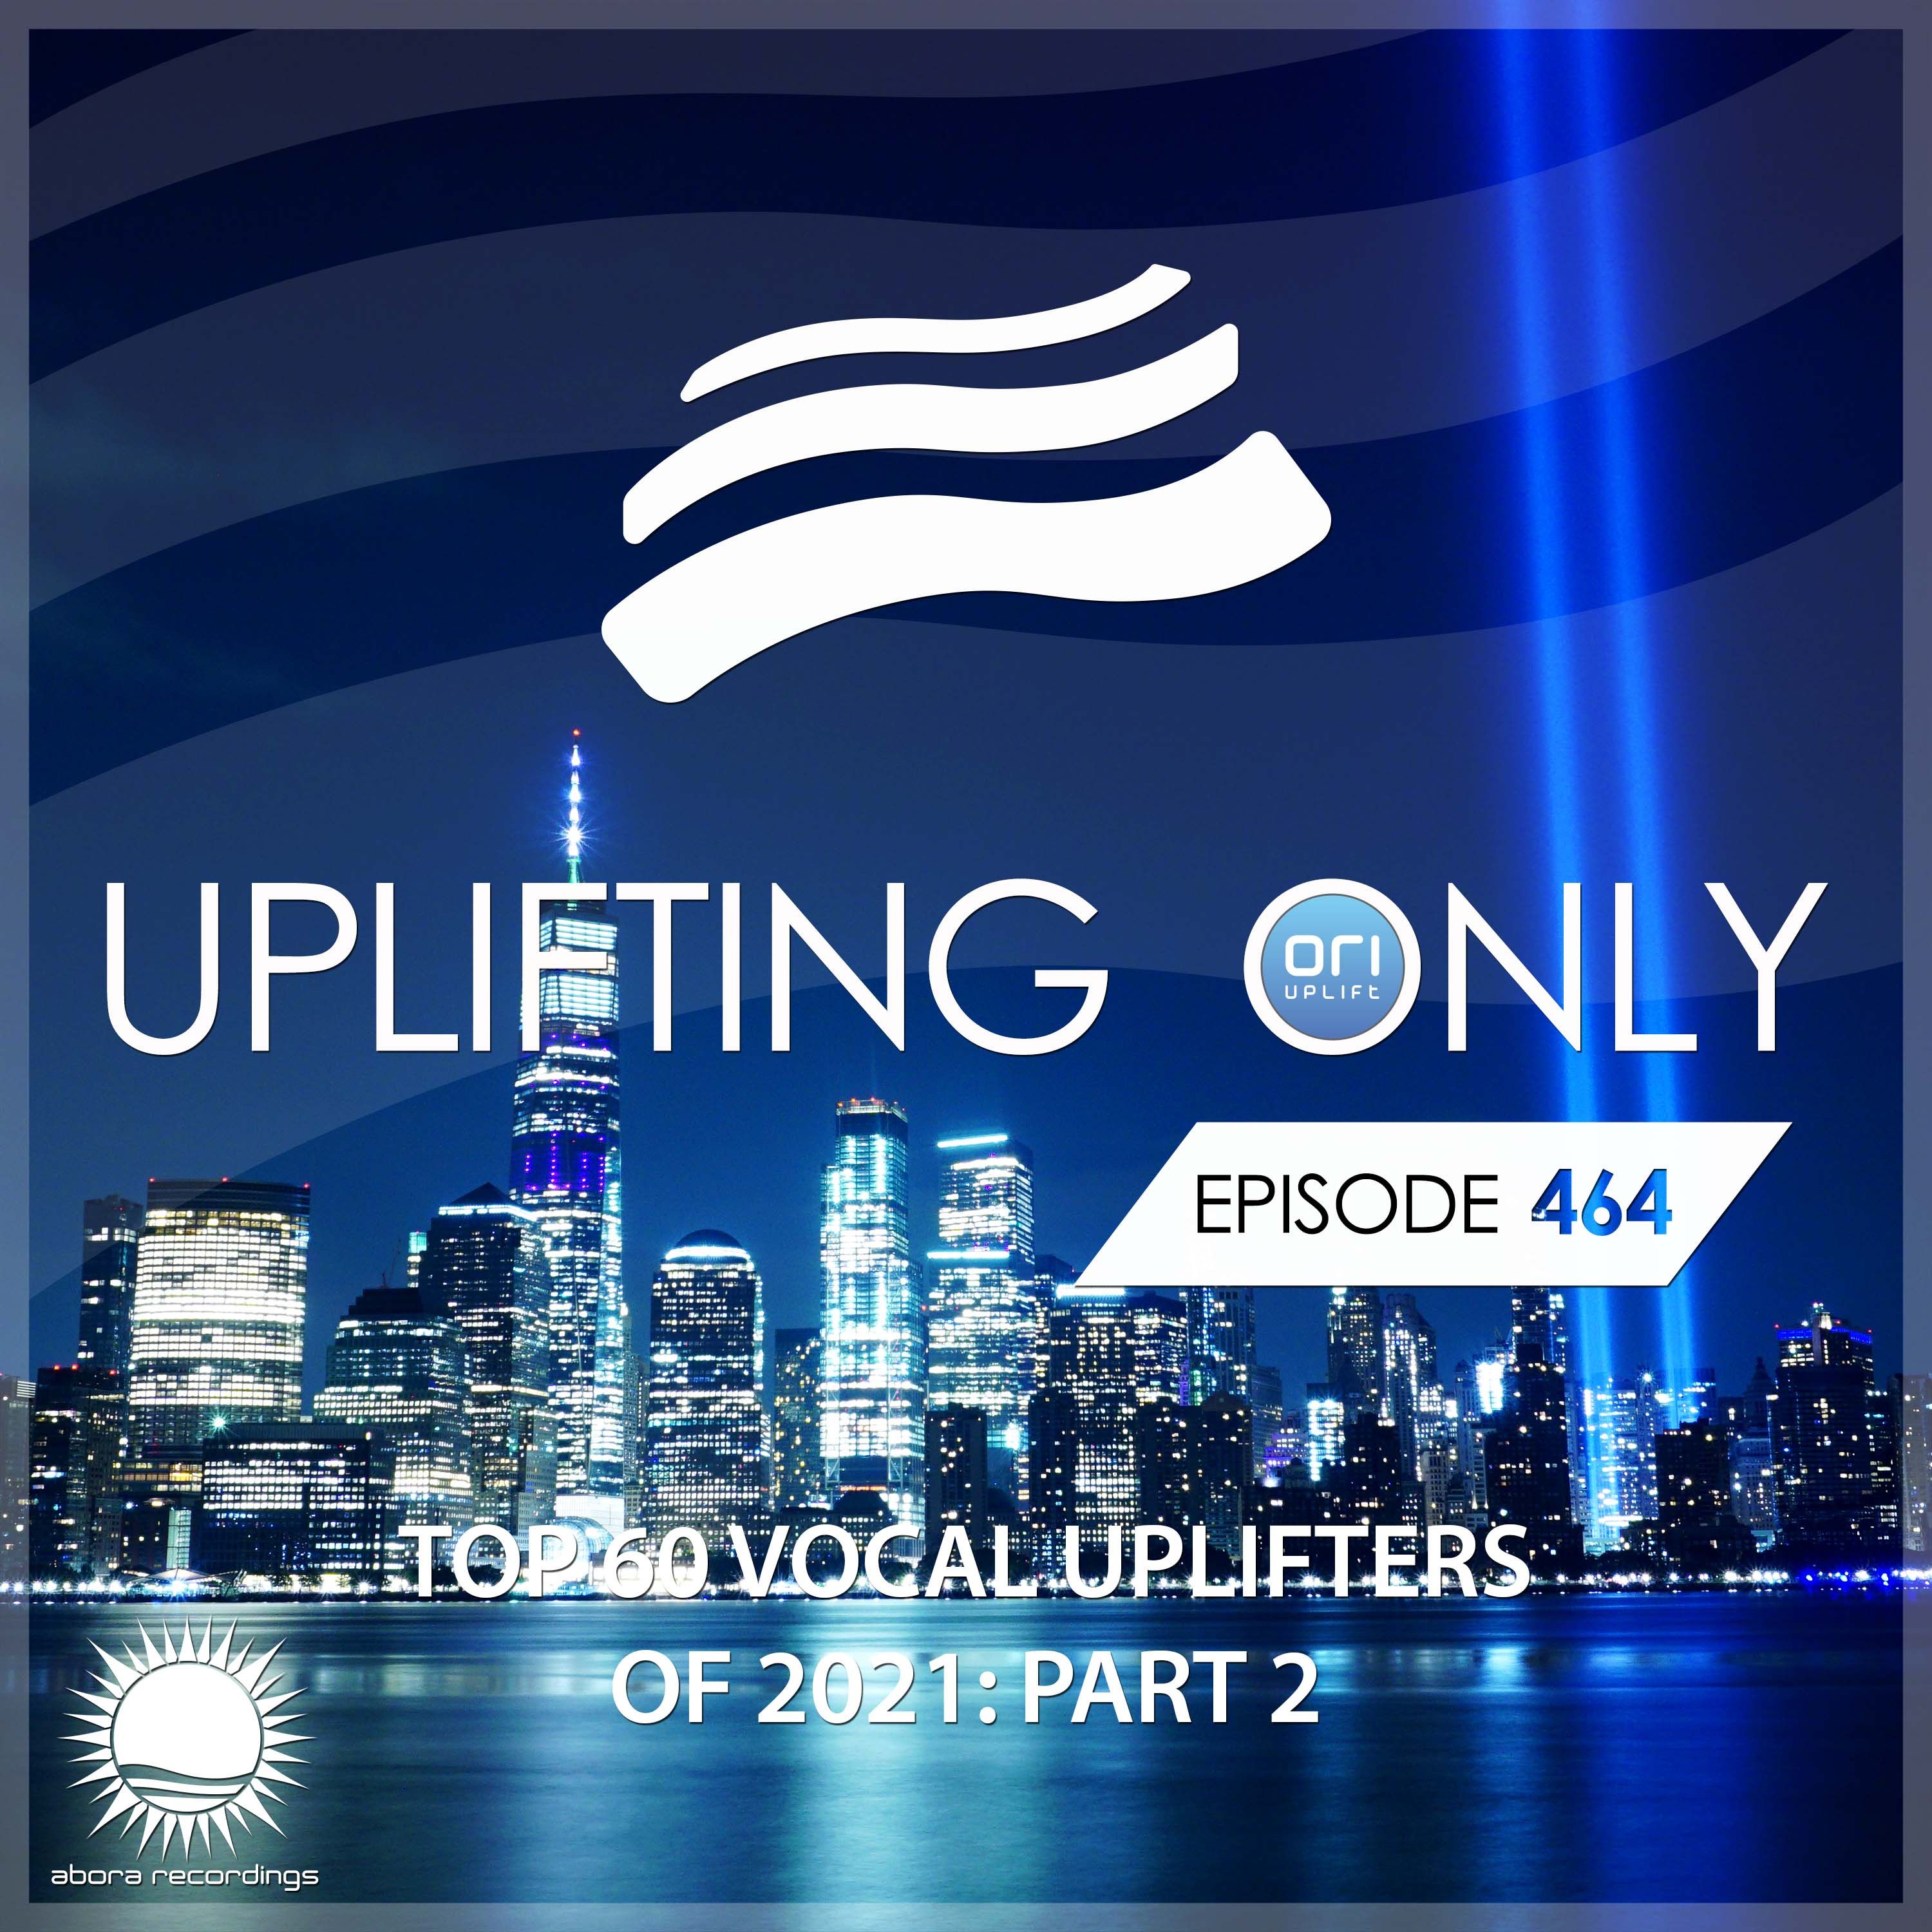 Uplifting Only 464 (Dec 30, 2021) (Ori's Top 60 Vocal Uplifters of 2021 - Part 2)